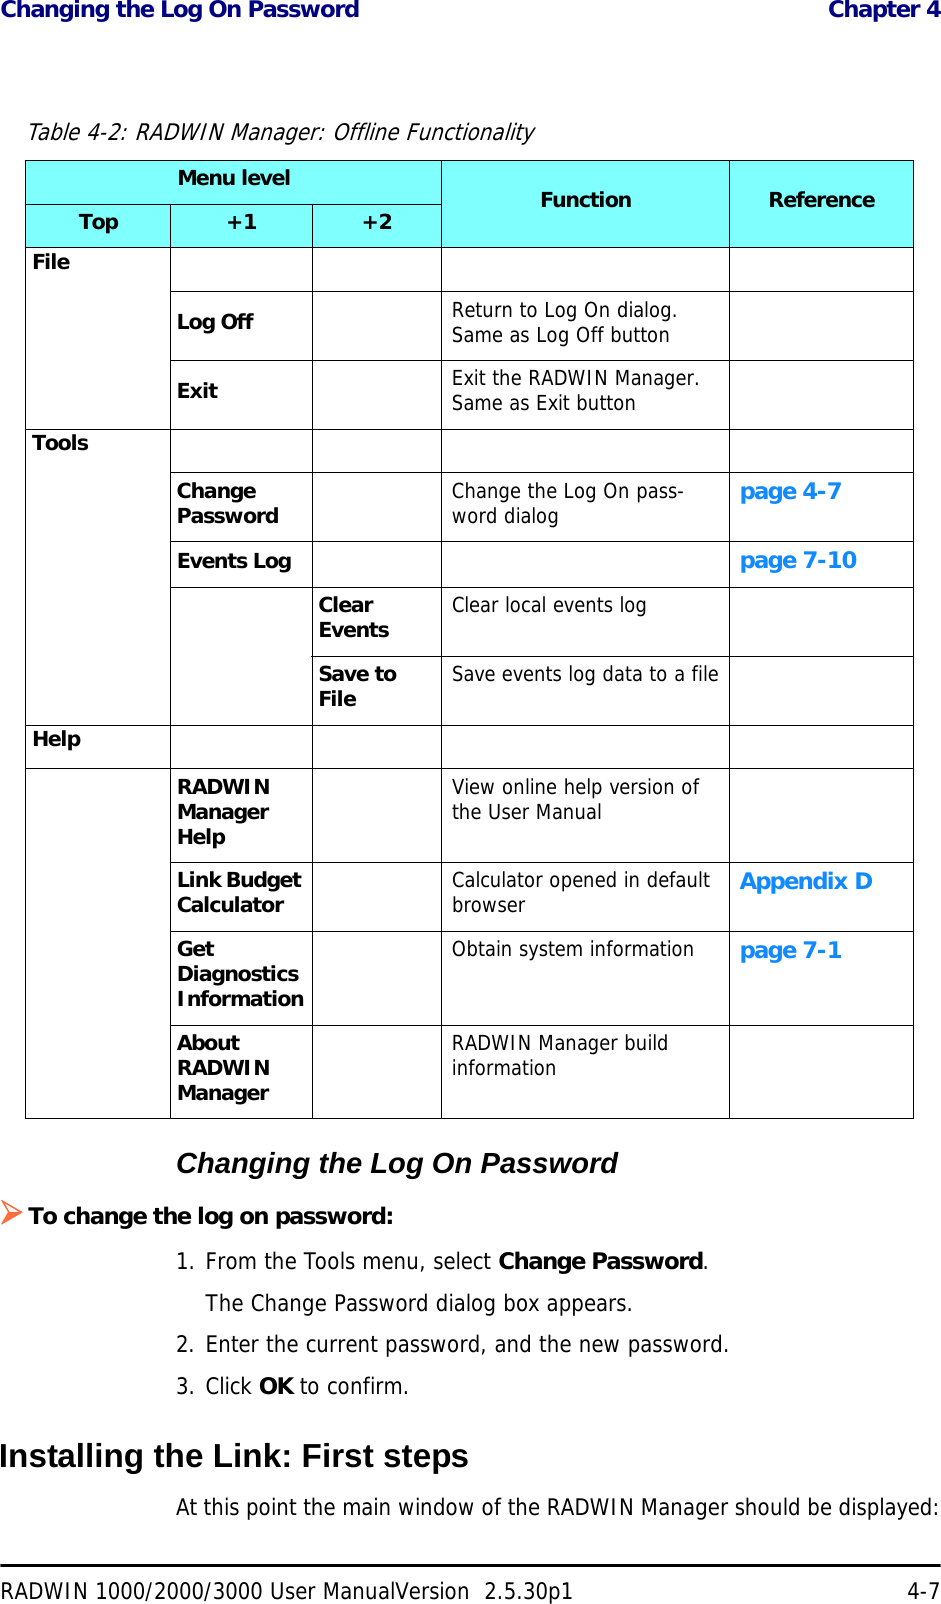 Changing the Log On Password  Chapter 4RADWIN 1000/2000/3000 User ManualVersion  2.5.30p1 4-7Changing the Log On Password¾To change the log on password:1. From the Tools menu, select Change Password.The Change Password dialog box appears.2. Enter the current password, and the new password.3. Click OK to confirm.Installing the Link: First stepsAt this point the main window of the RADWIN Manager should be displayed:Table 4-2: RADWIN Manager: Offline FunctionalityMenu level Function ReferenceTop +1 +2FileLog Off Return to Log On dialog. Same as Log Off buttonExit Exit the RADWIN Manager. Same as Exit buttonToolsChange Password Change the Log On pass-word dialog page 4-7Events Log page 7-10Clear Events Clear local events logSave to File Save events log data to a fileHelpRADWIN Manager HelpView online help version of the User ManualLink Budget Calculator Calculator opened in default browser Appendix DGet Diagnostics InformationObtain system information page 7-1About RADWIN ManagerRADWIN Manager build information